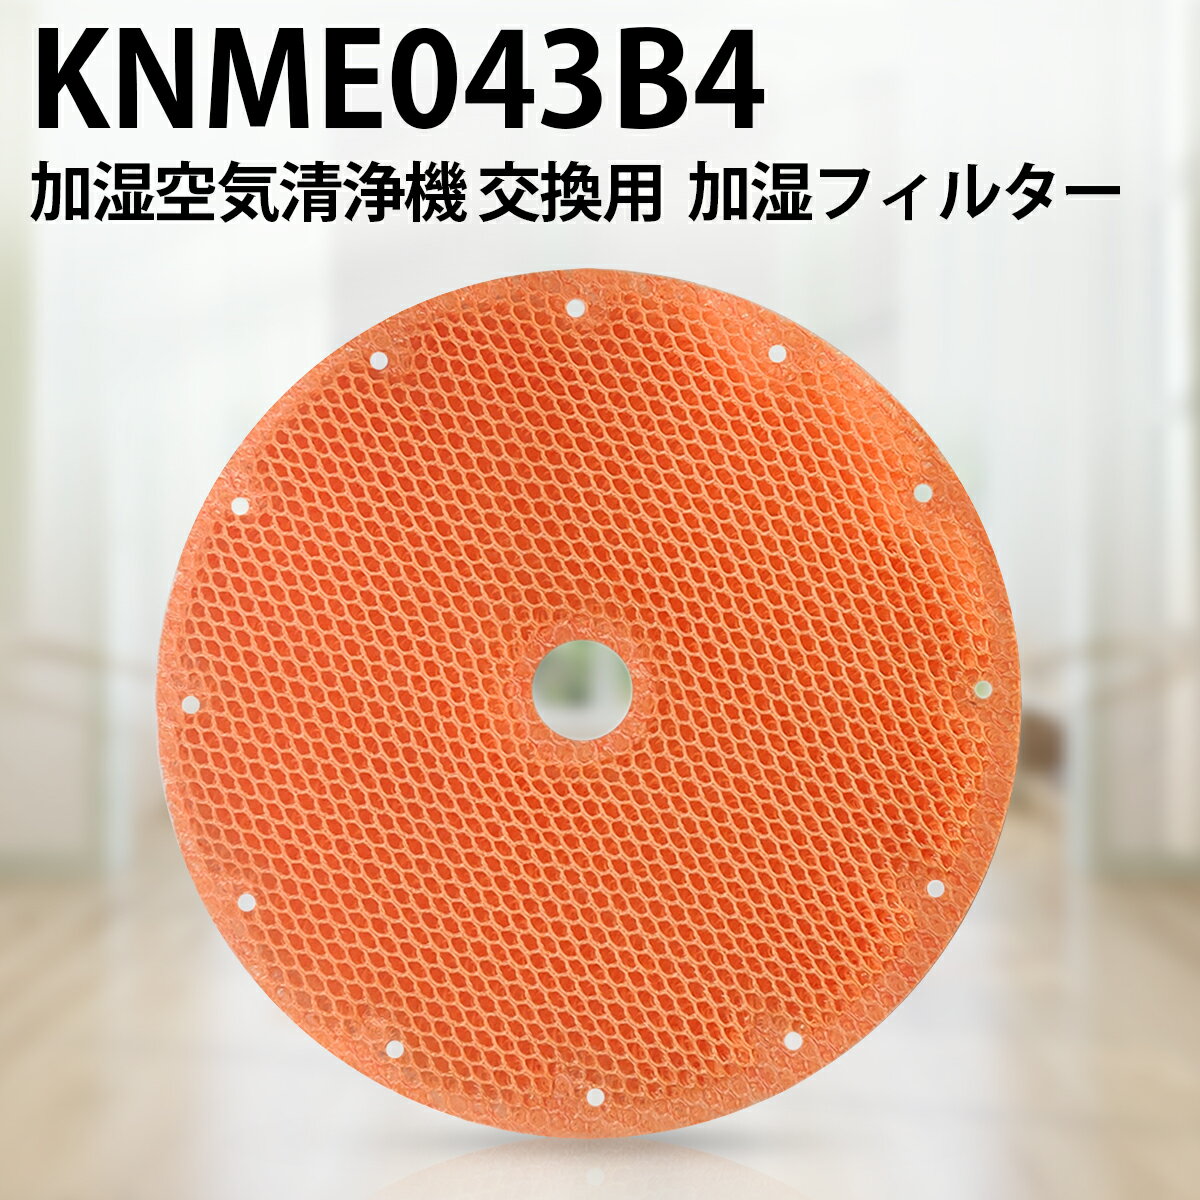 KNME043B4 加湿フィルター ダイキン 空気清浄機 フィルター knme043b4（KNME043A4の代替品番）99a0509 加湿空気清浄機 交換用フィルター「1枚入り/互換品」